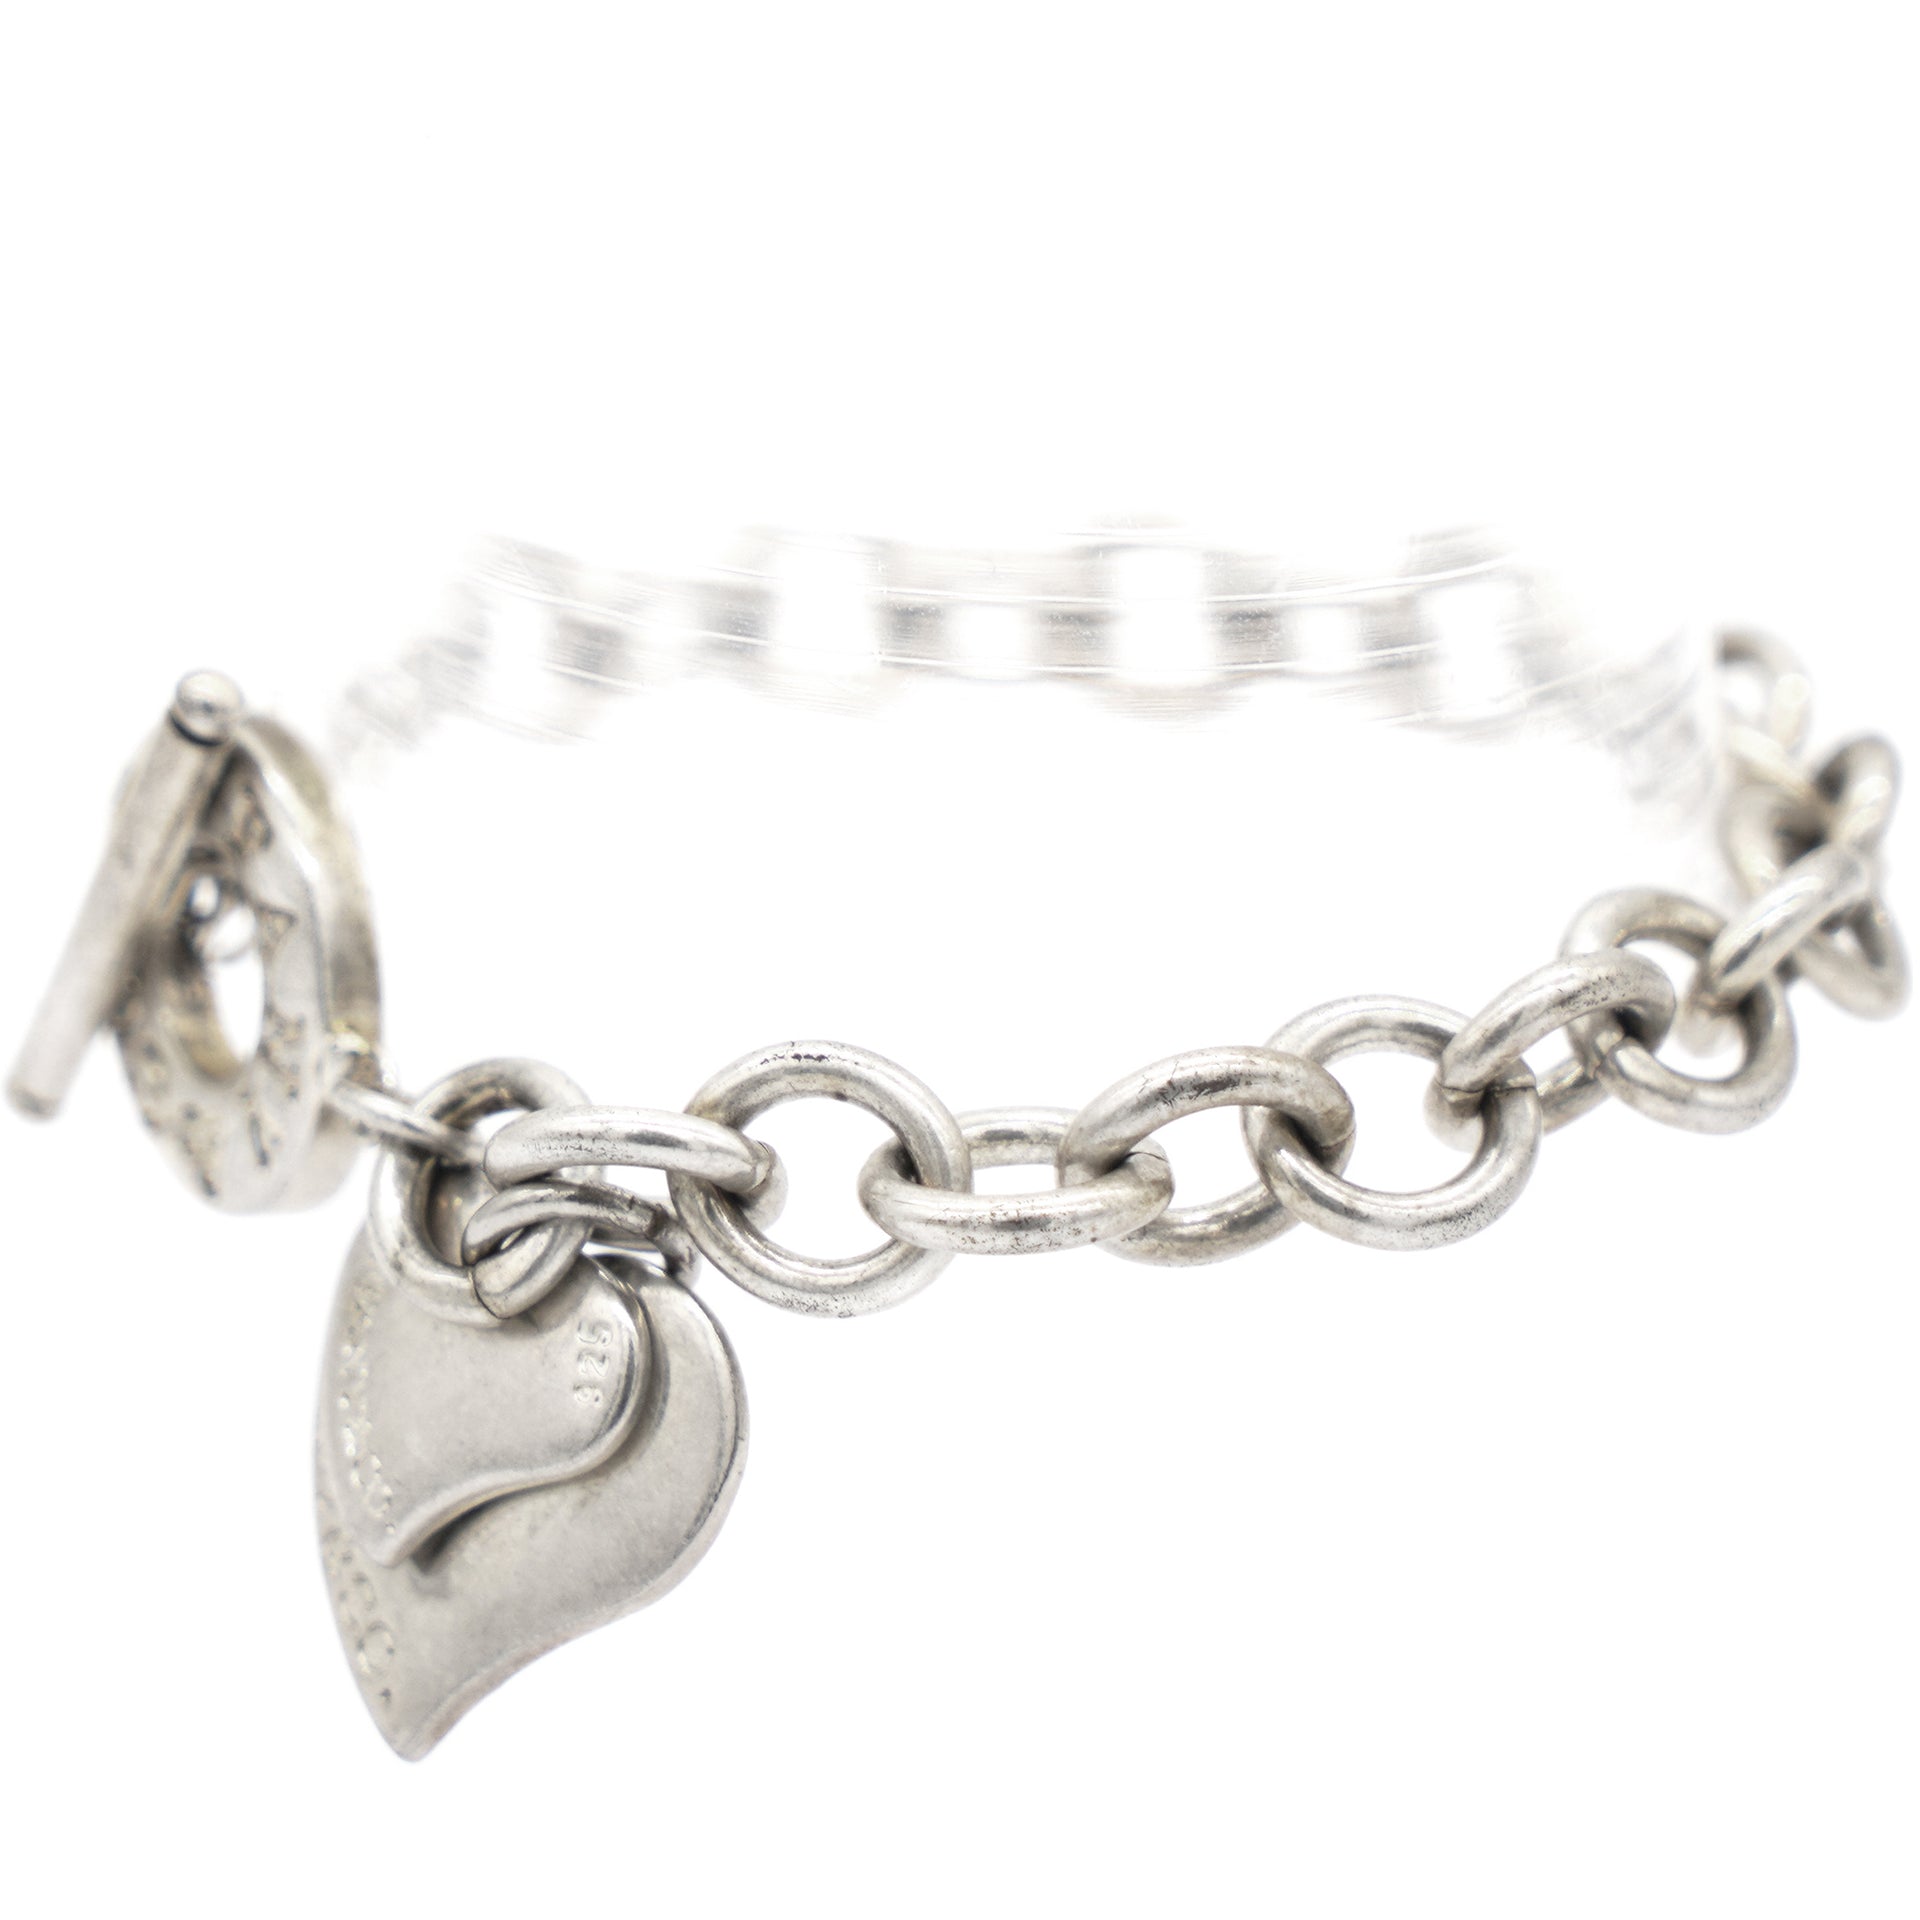 Heart Tag Charm Silver Chain Toggle Bracelet